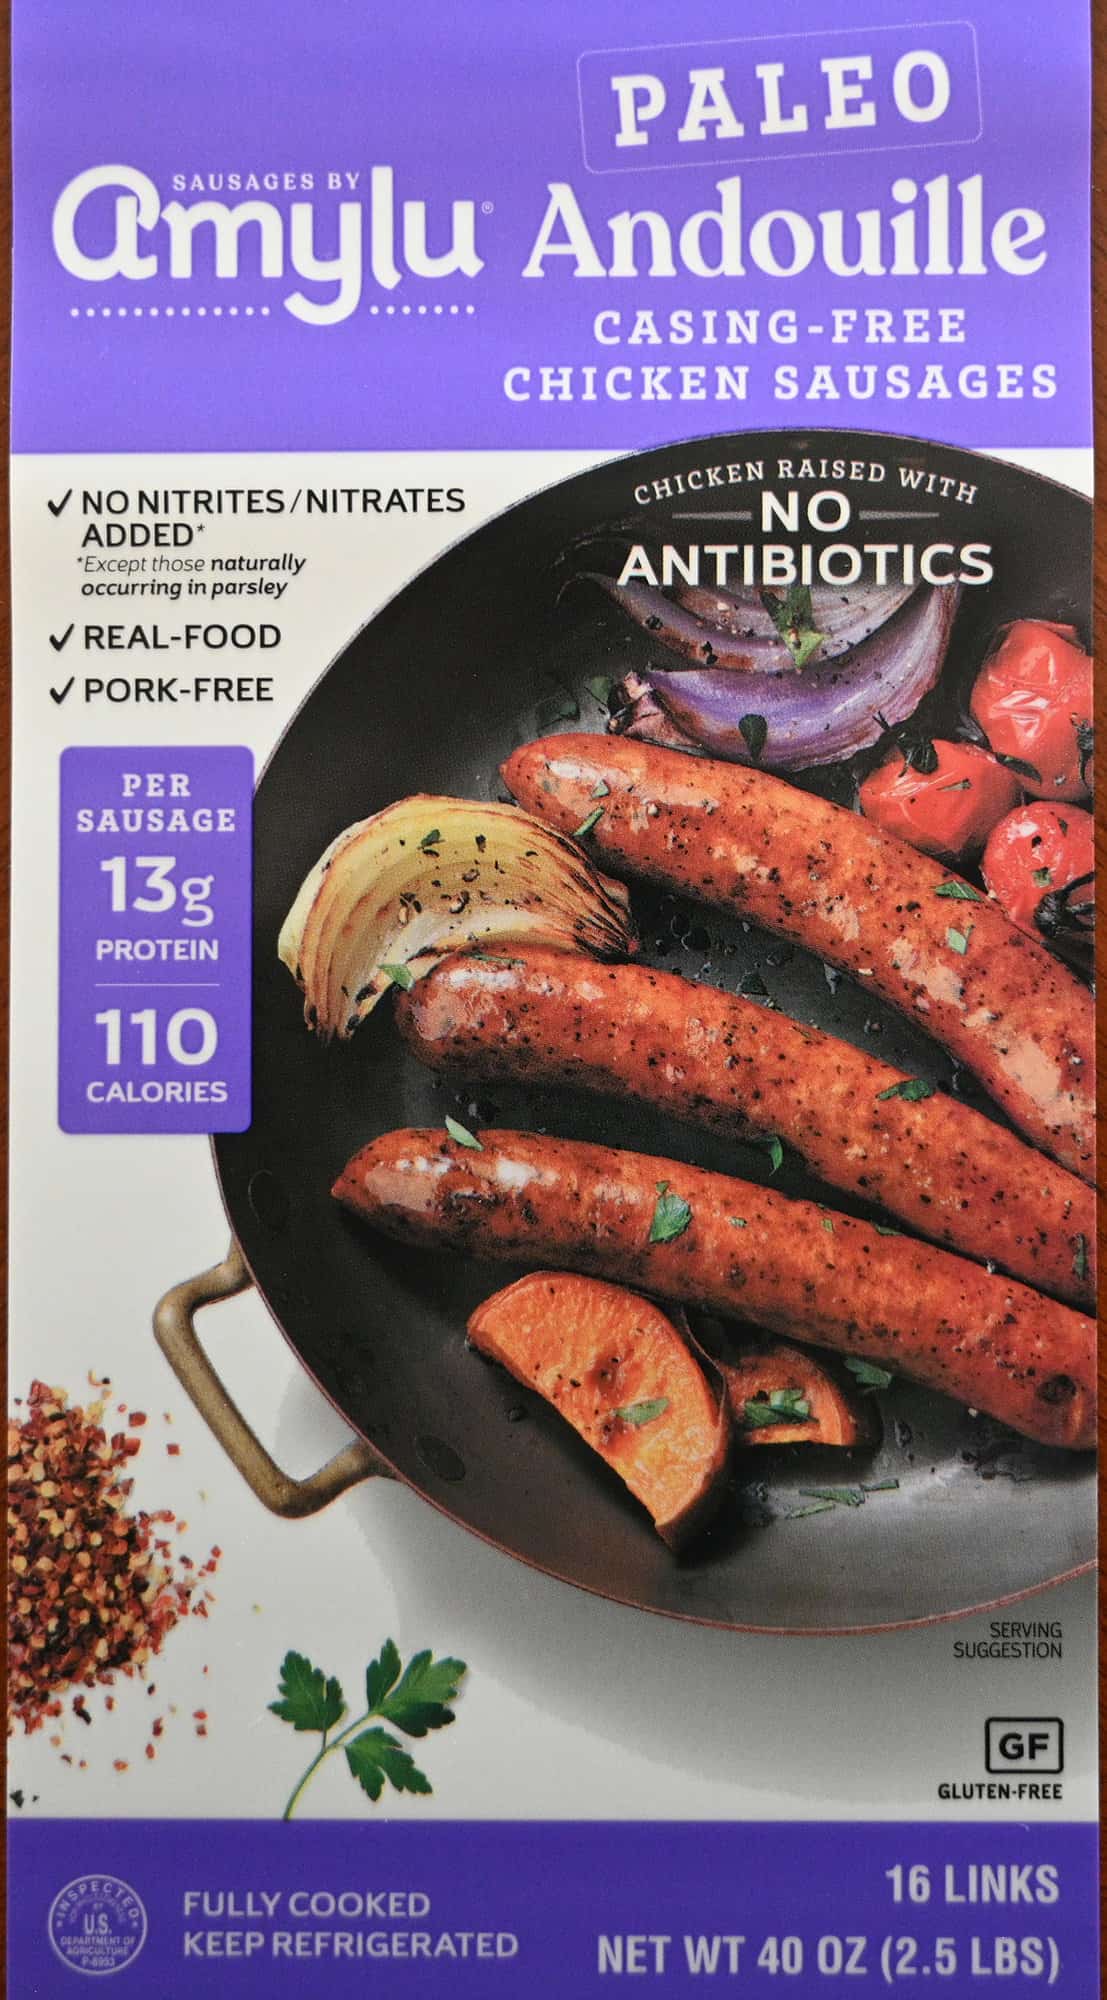 Closeup image of the andouille sausages label from the package showing that they're nitrate/nitrite free. 